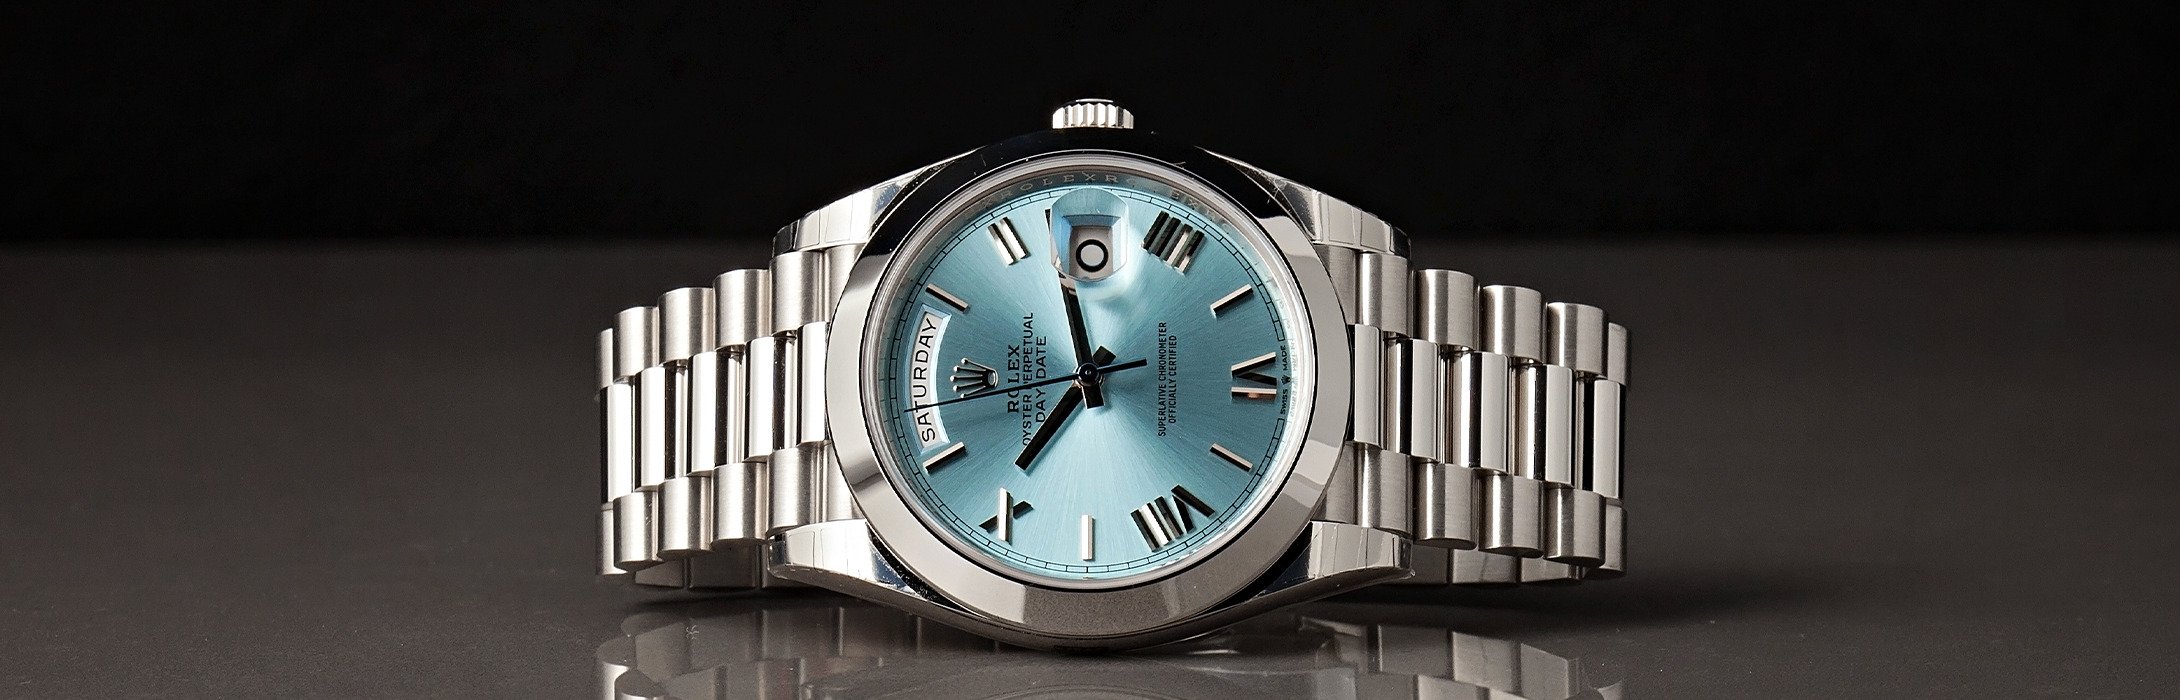 Rolex Platinum Day-Date Watch Ultimate Buying Guide |